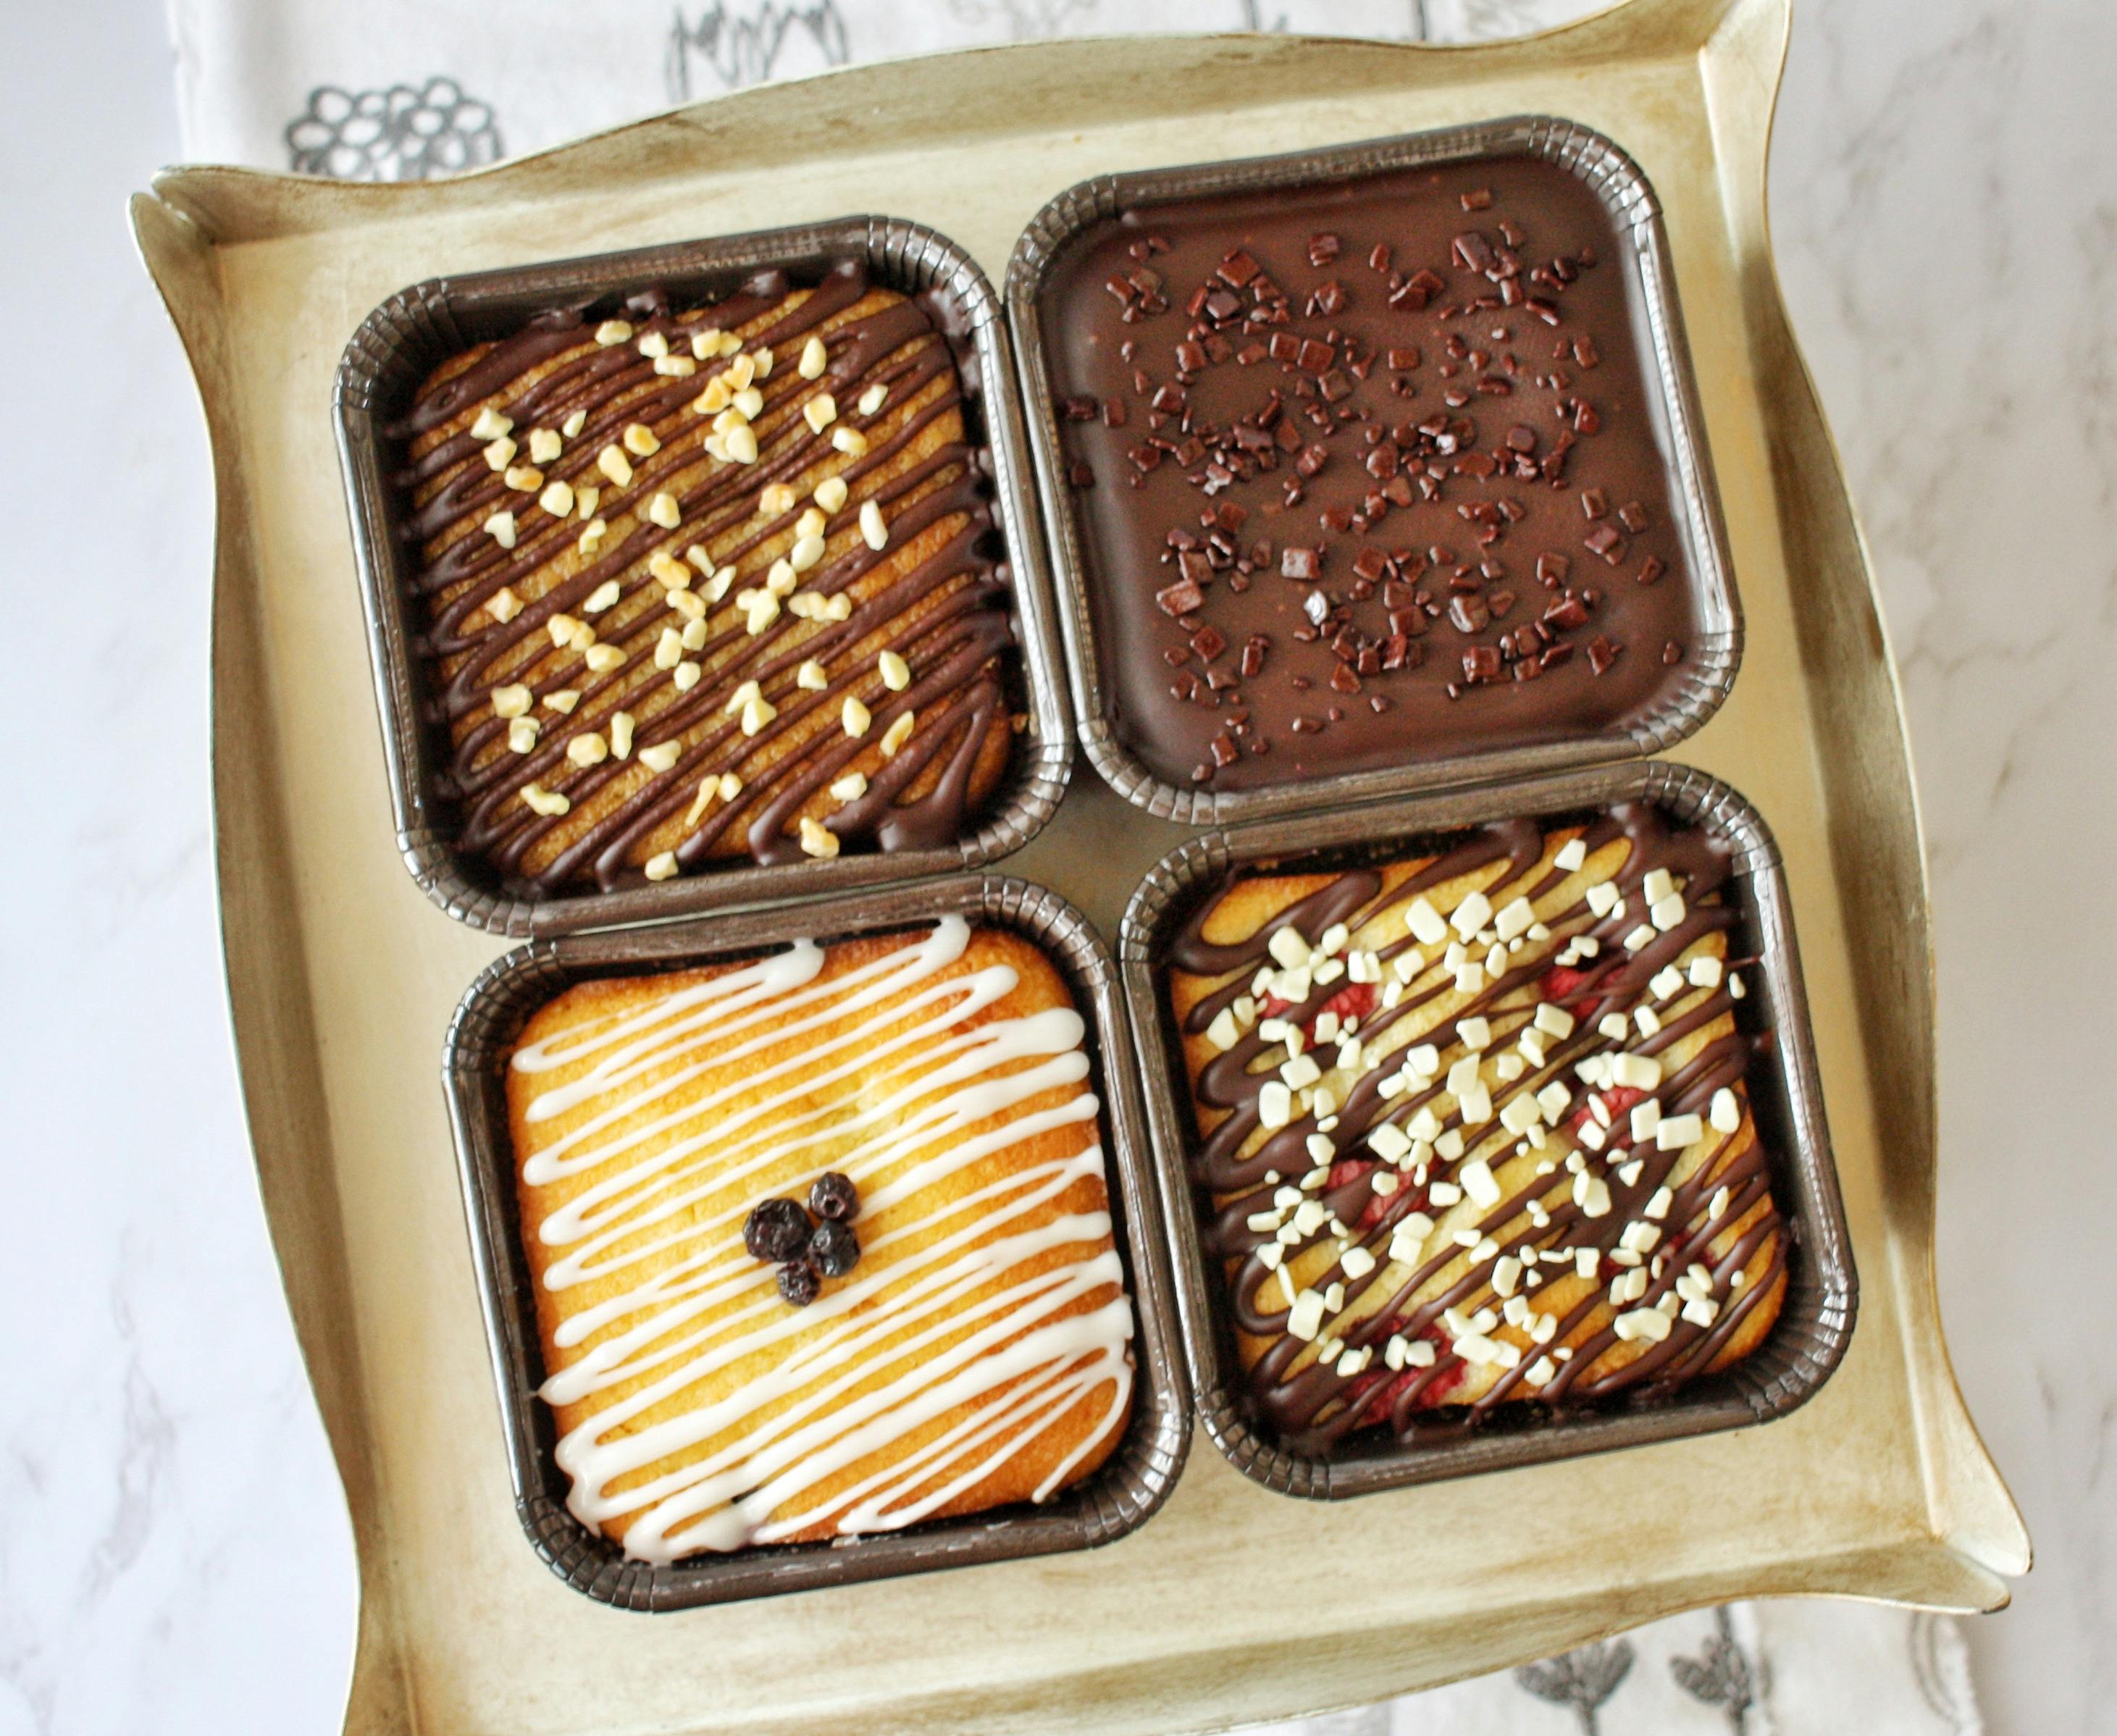 Signature Box  of 4 personal size cakes